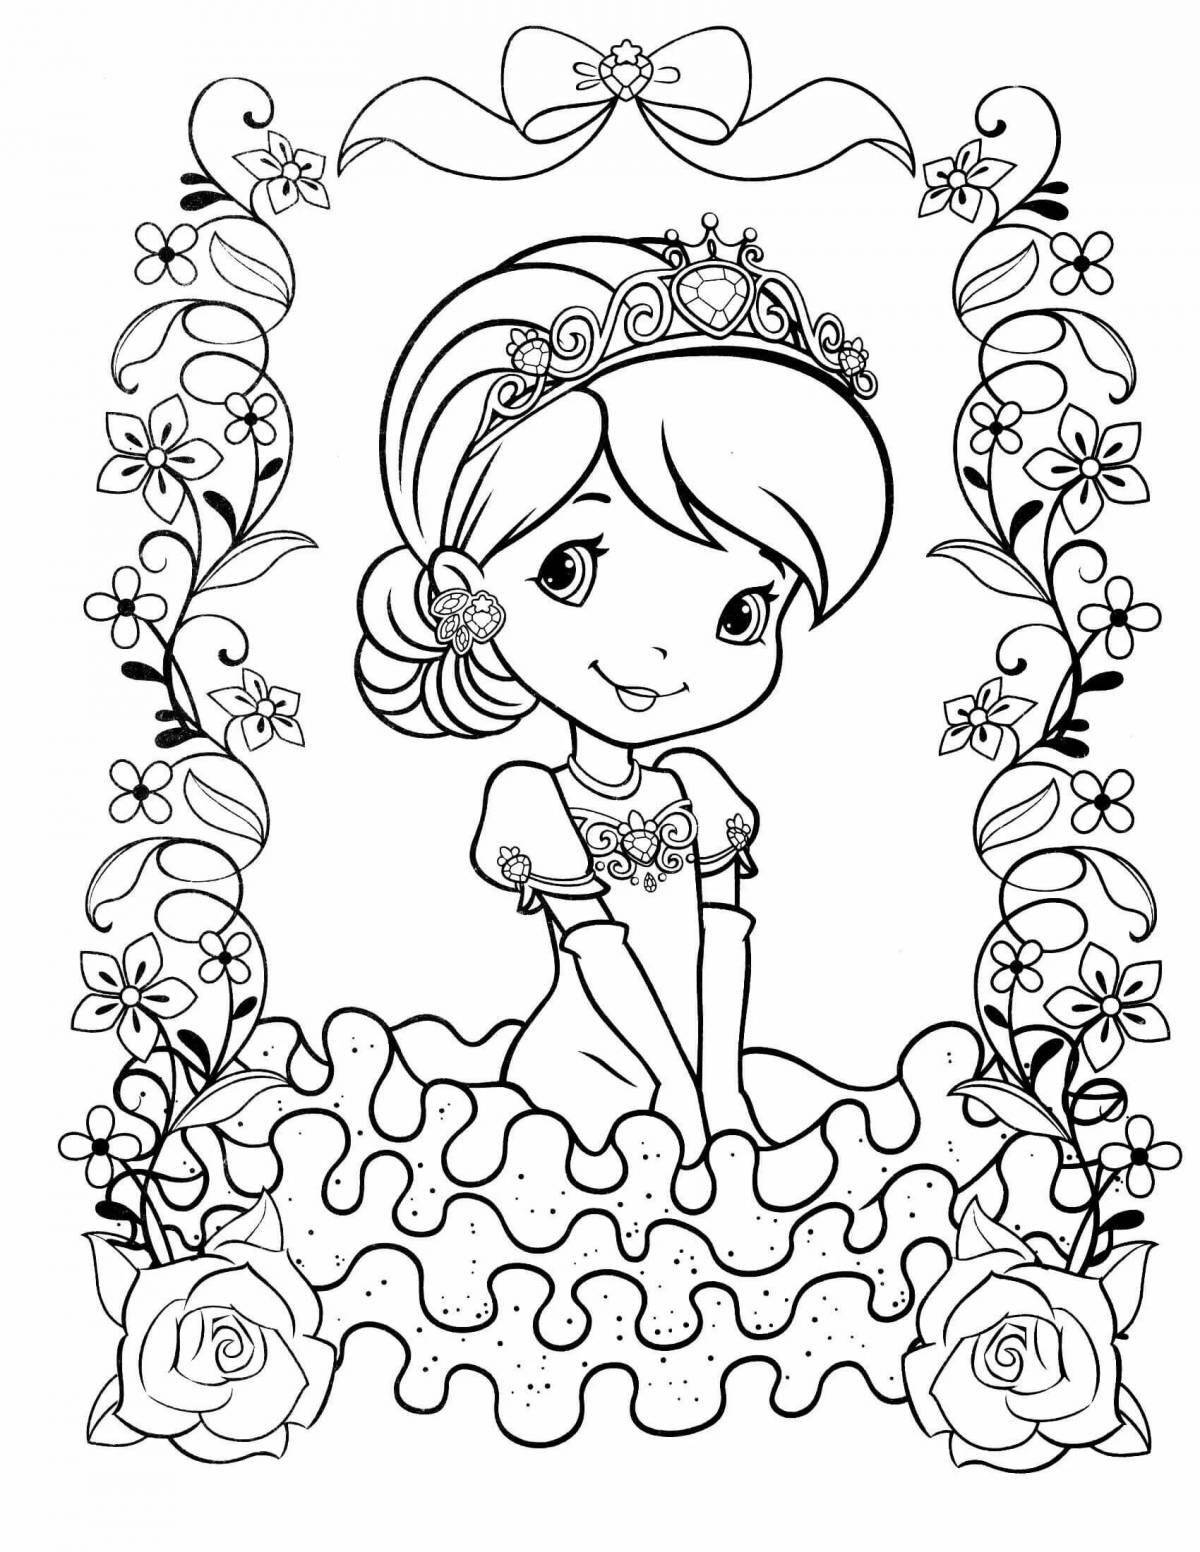 Adorable princess coloring pages for girls 4 years old